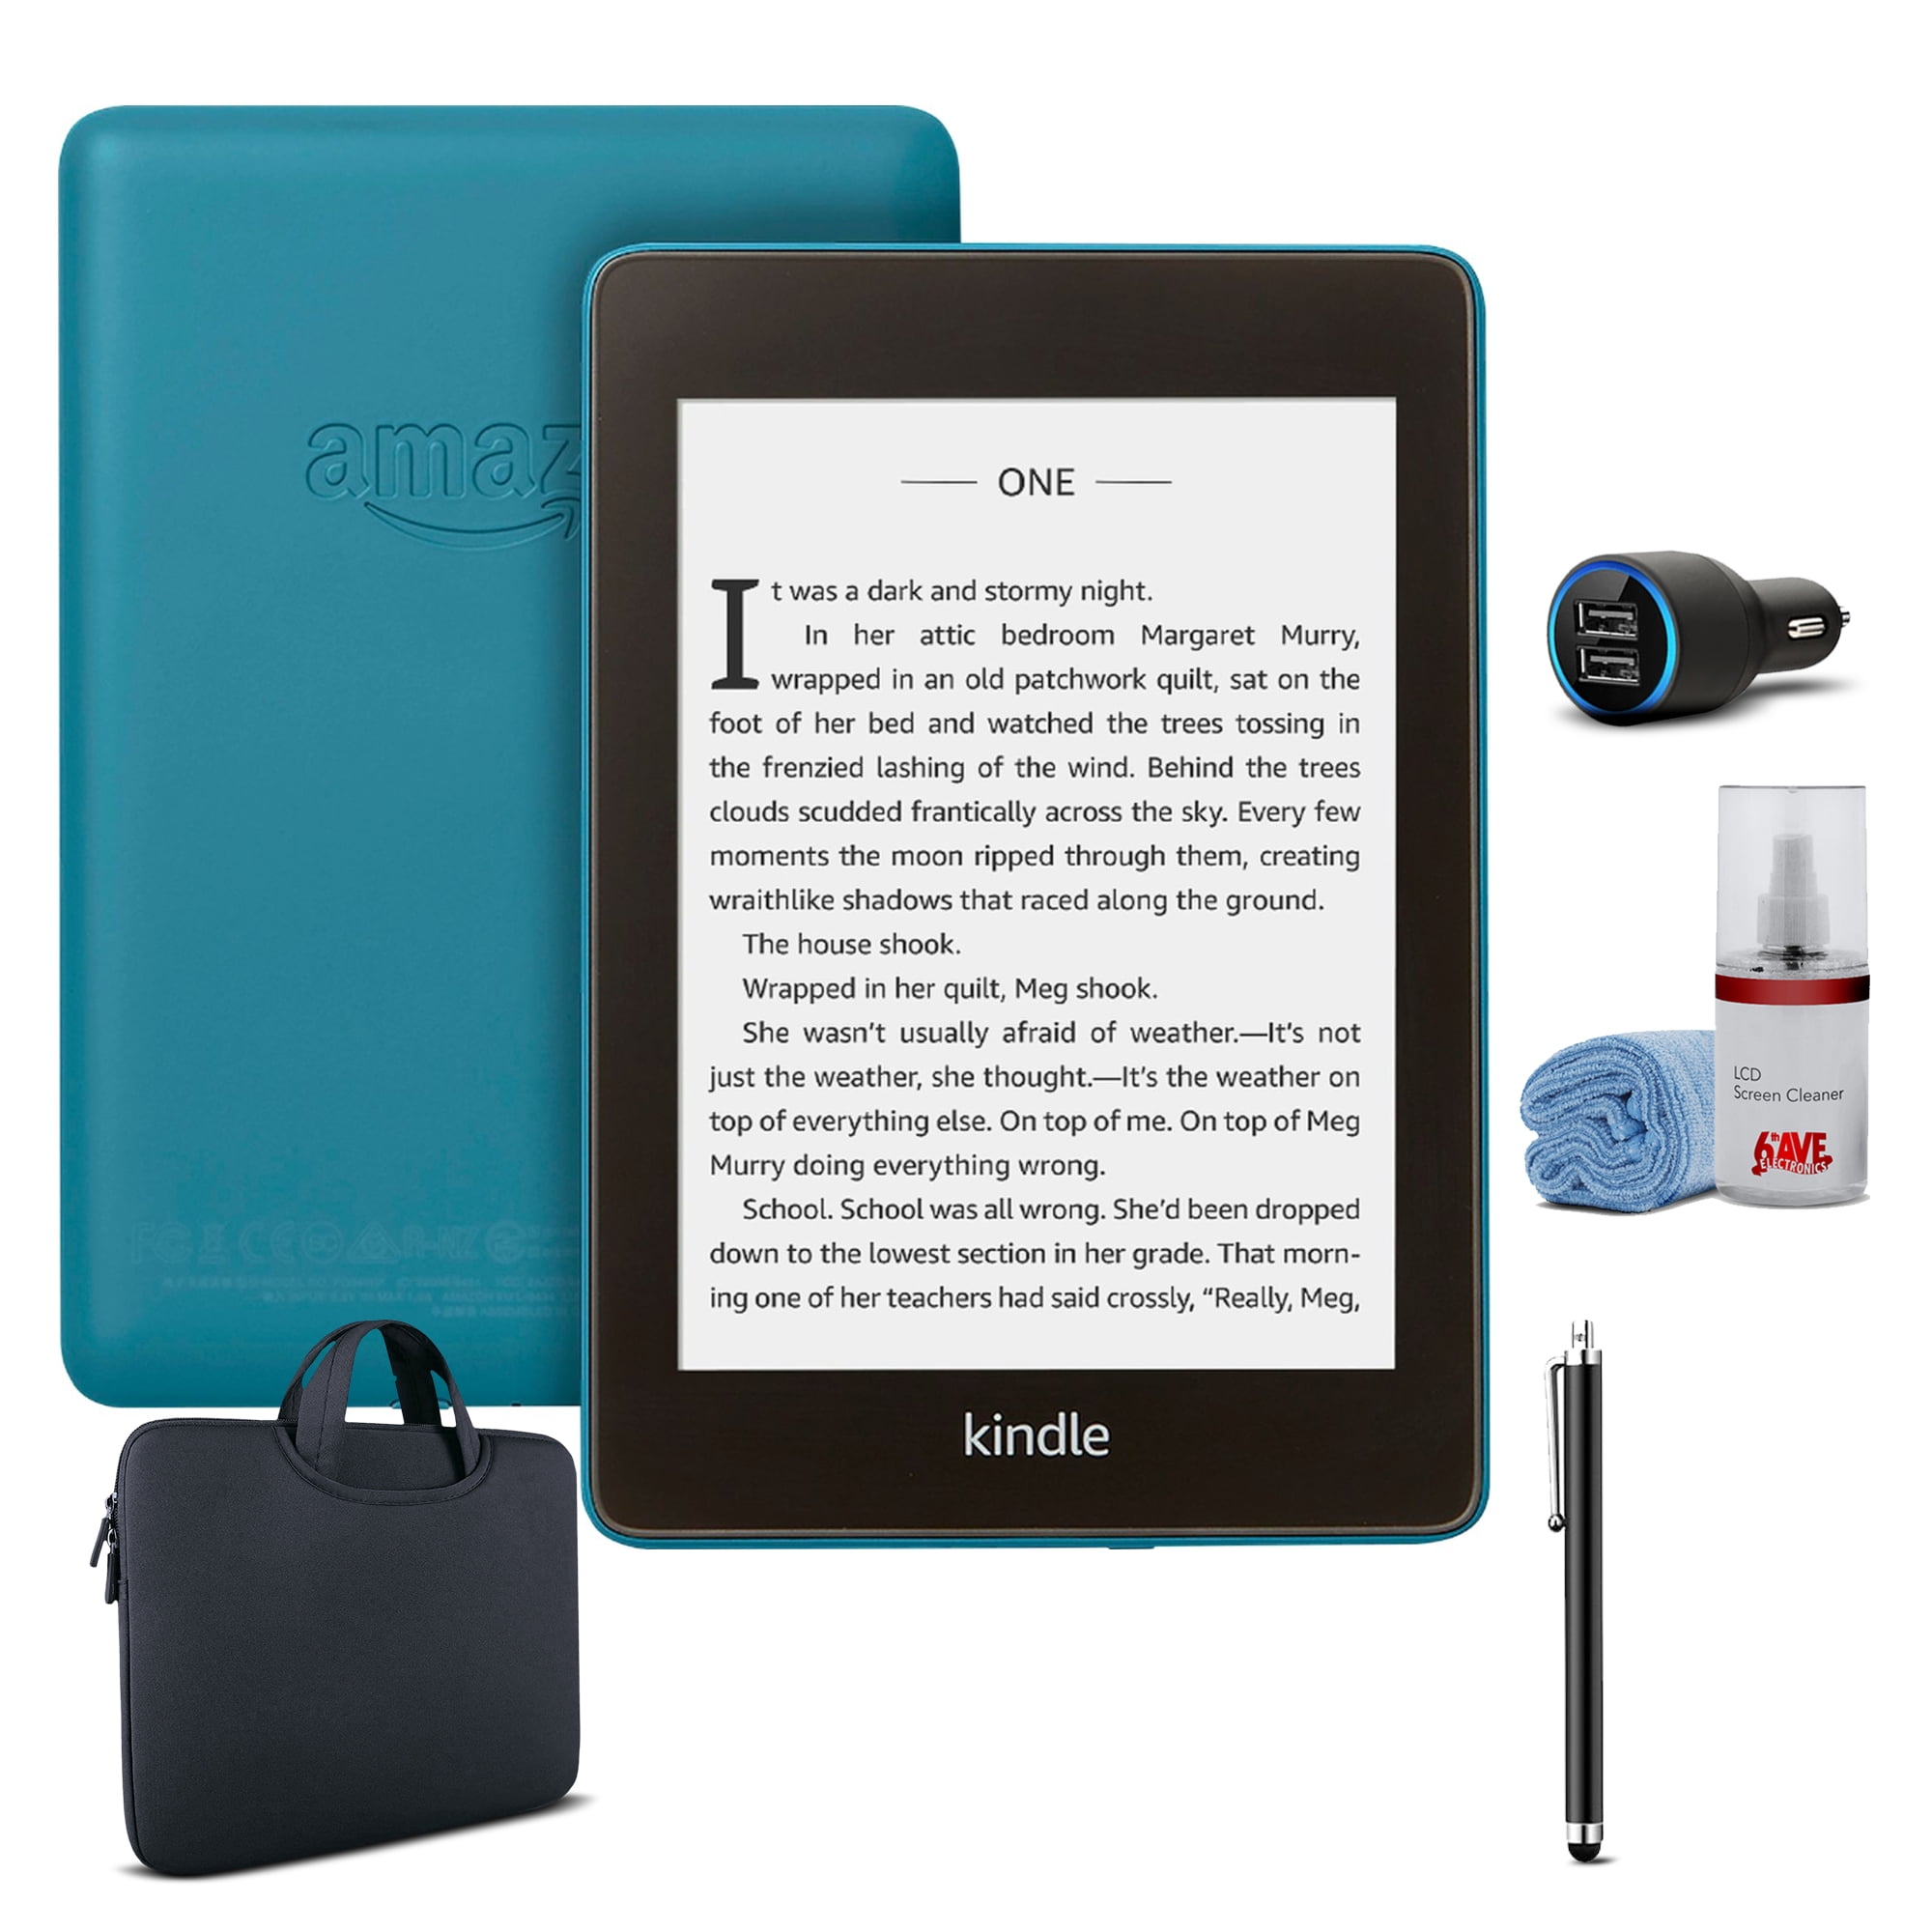 Kindle Paperwhite Essentials Bundle including Kindle Paperwhite Ad-Supported Wifi and Power Adapter Leather Cover 